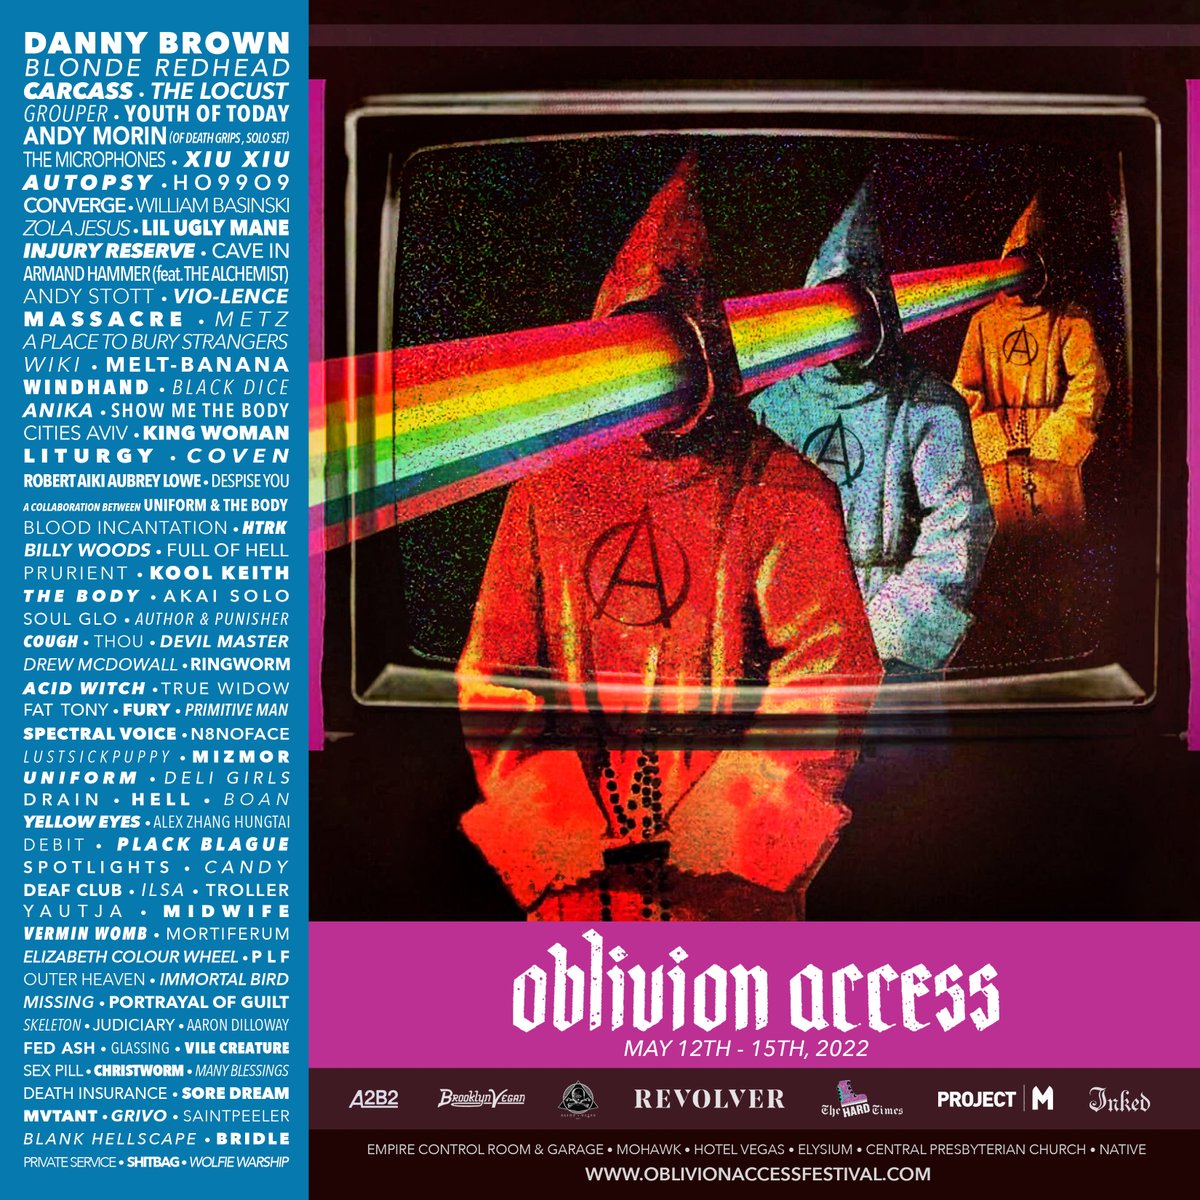 Join us at Oblivion Access this May. Tickets on sale Friday Feb. 11th at 10am CT. oblivionaccessfestival.com